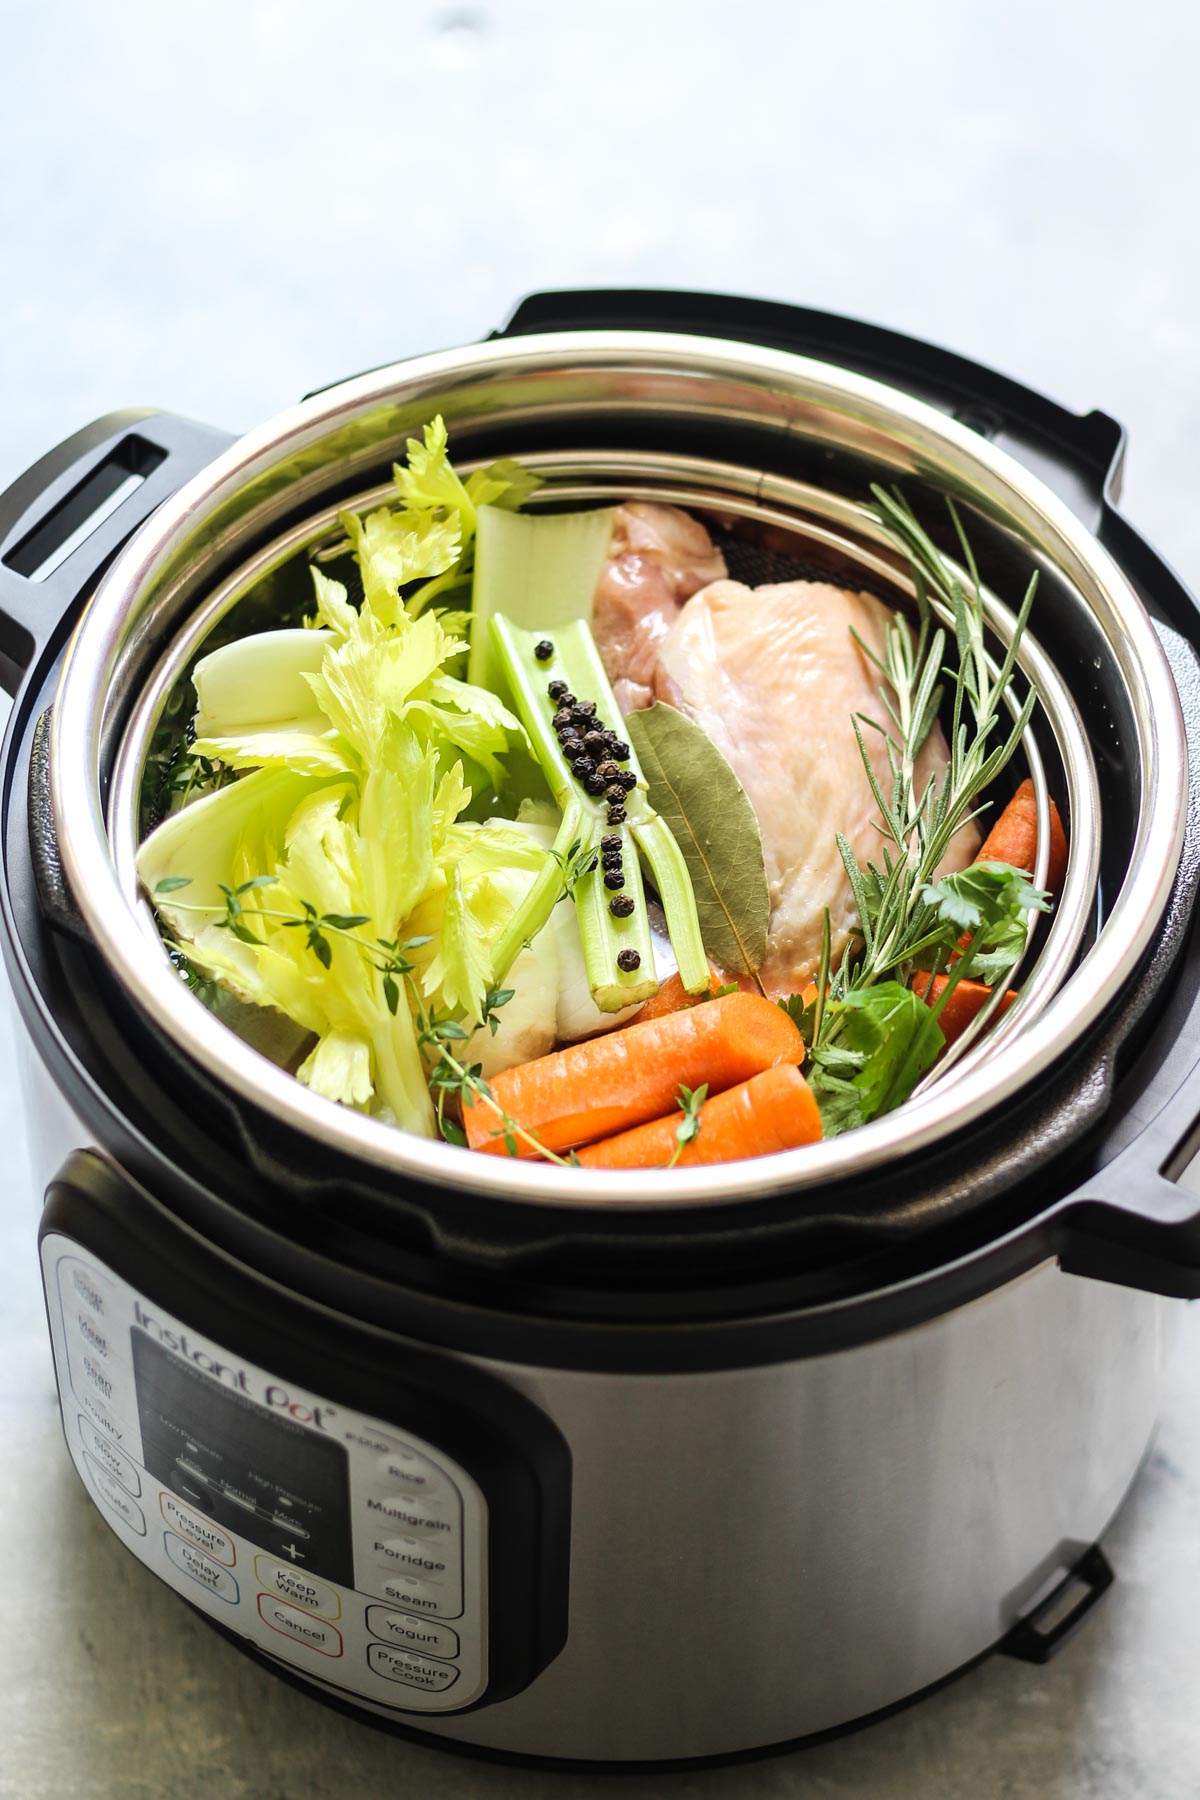 carrots, onions, and herbs in an instant pot